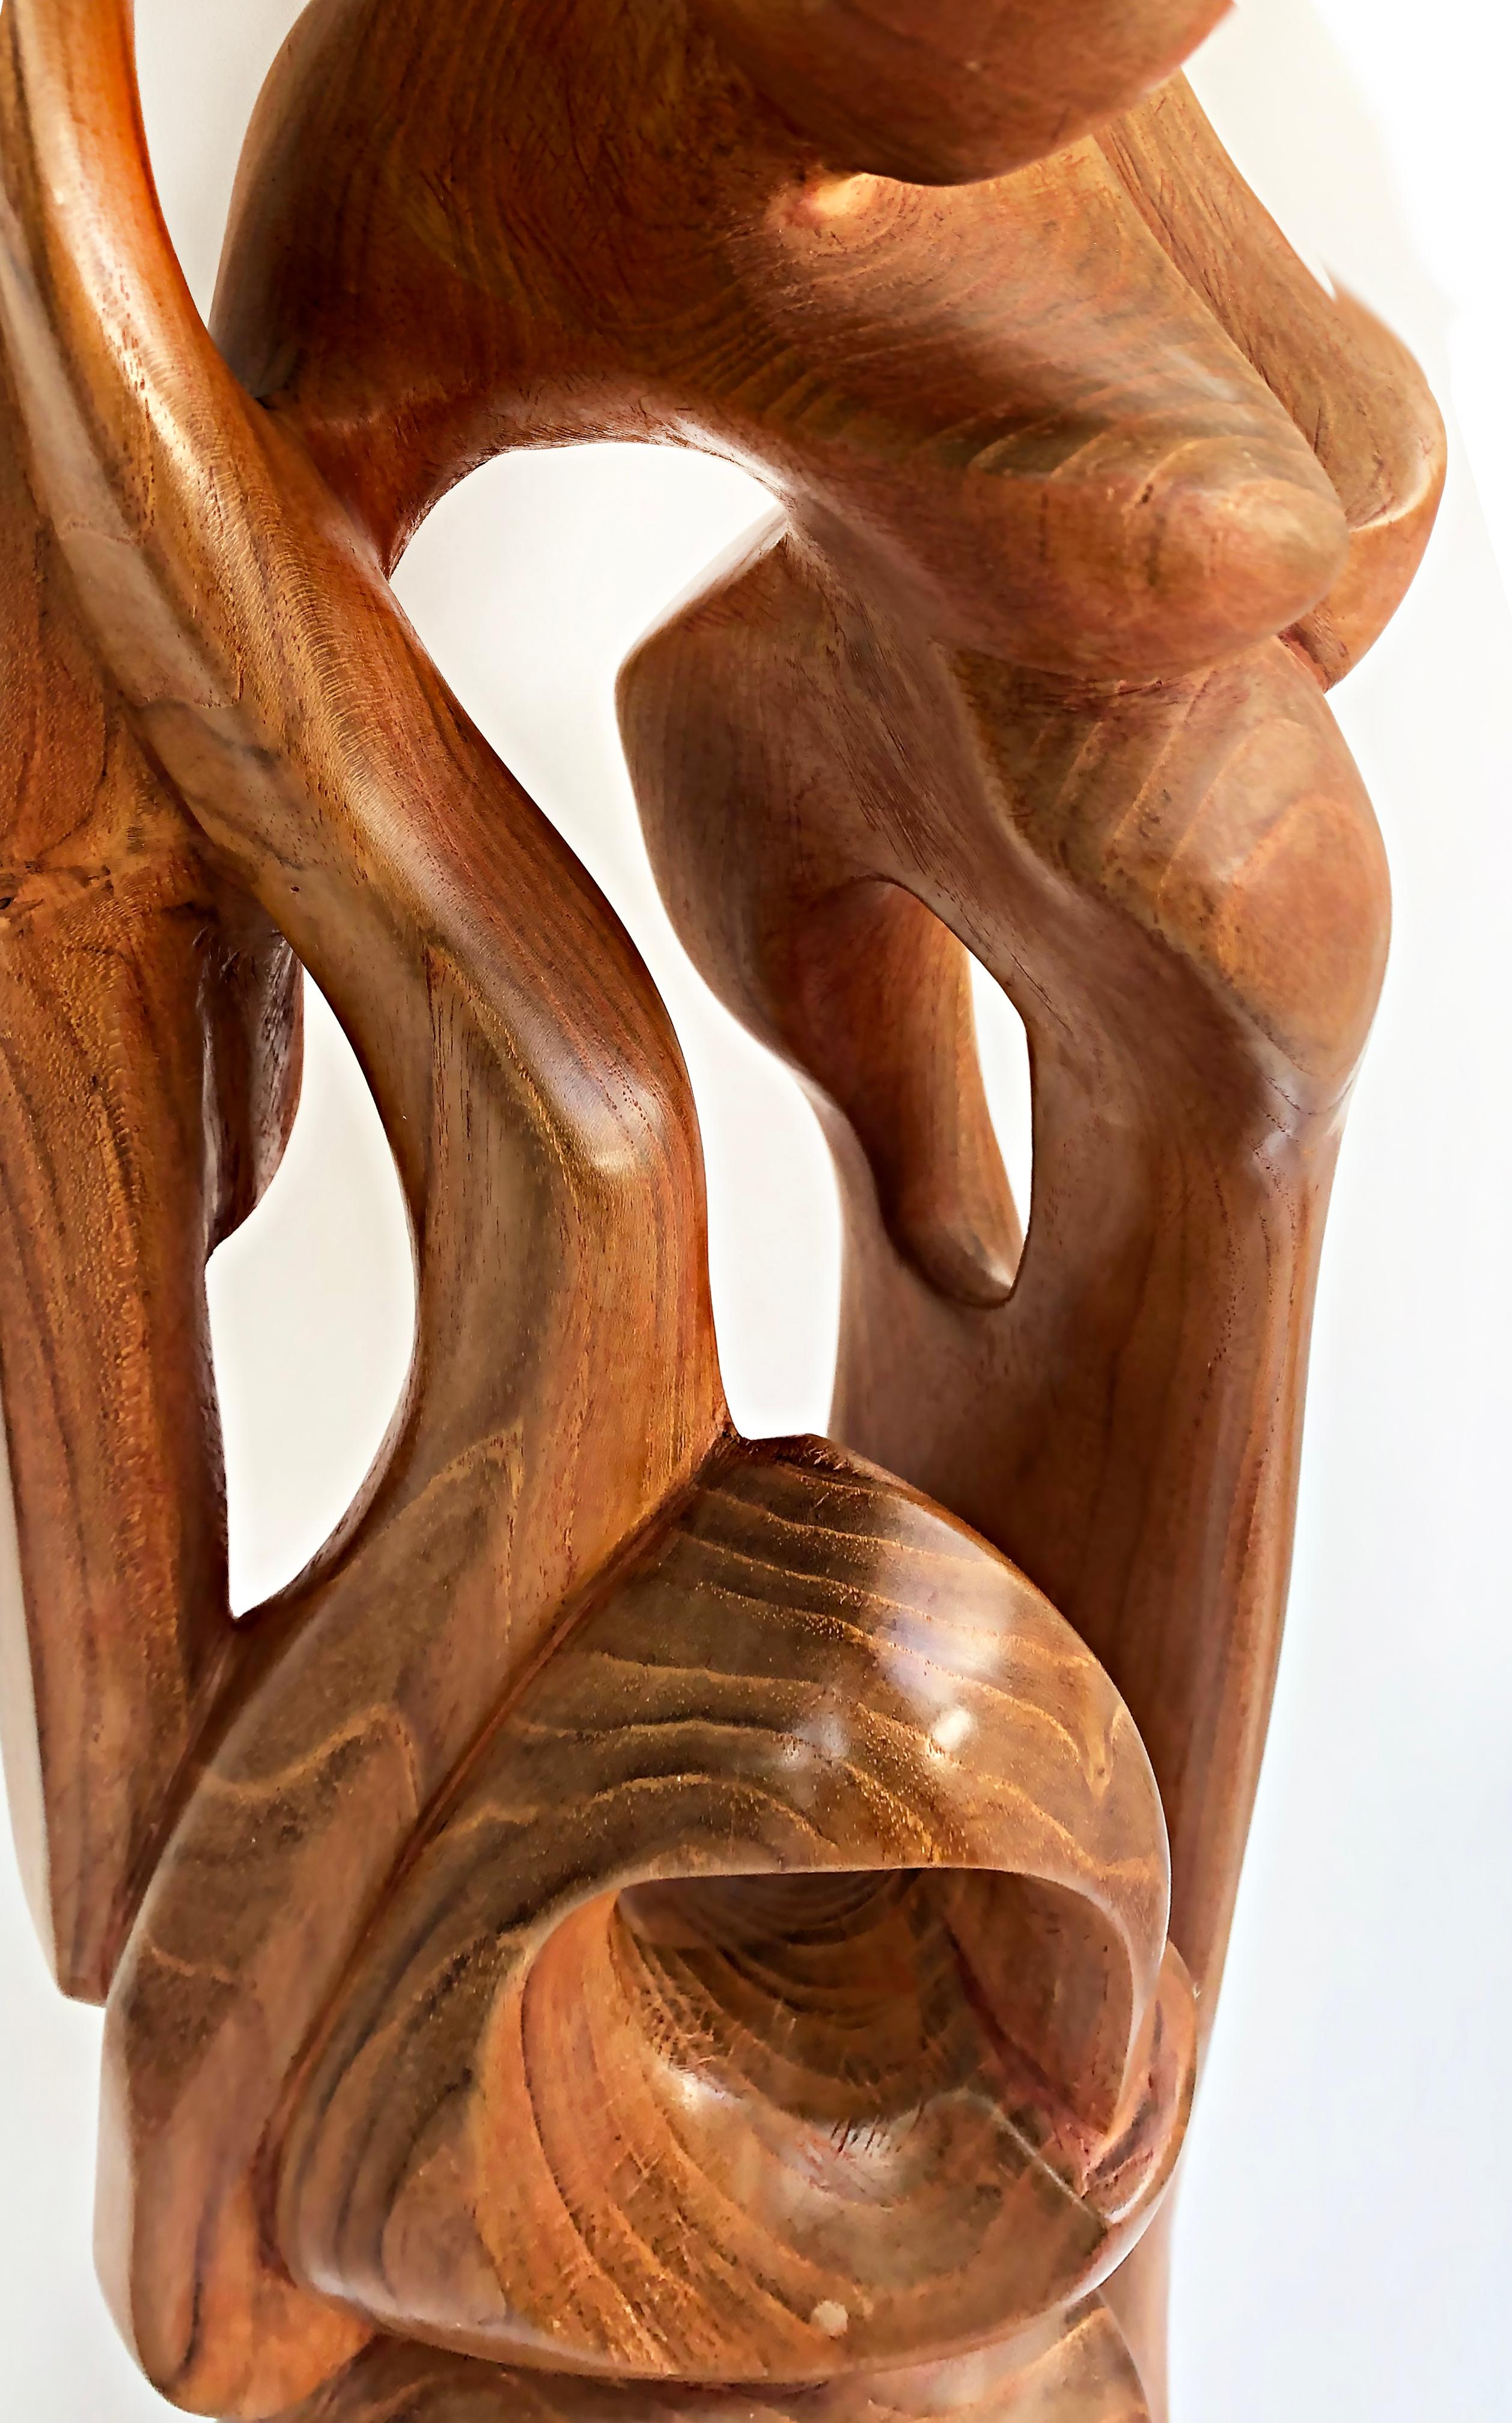 Contemporary Tall Carved Teak Sculpture by Ramon Barales, Cuban American Artist, 2003